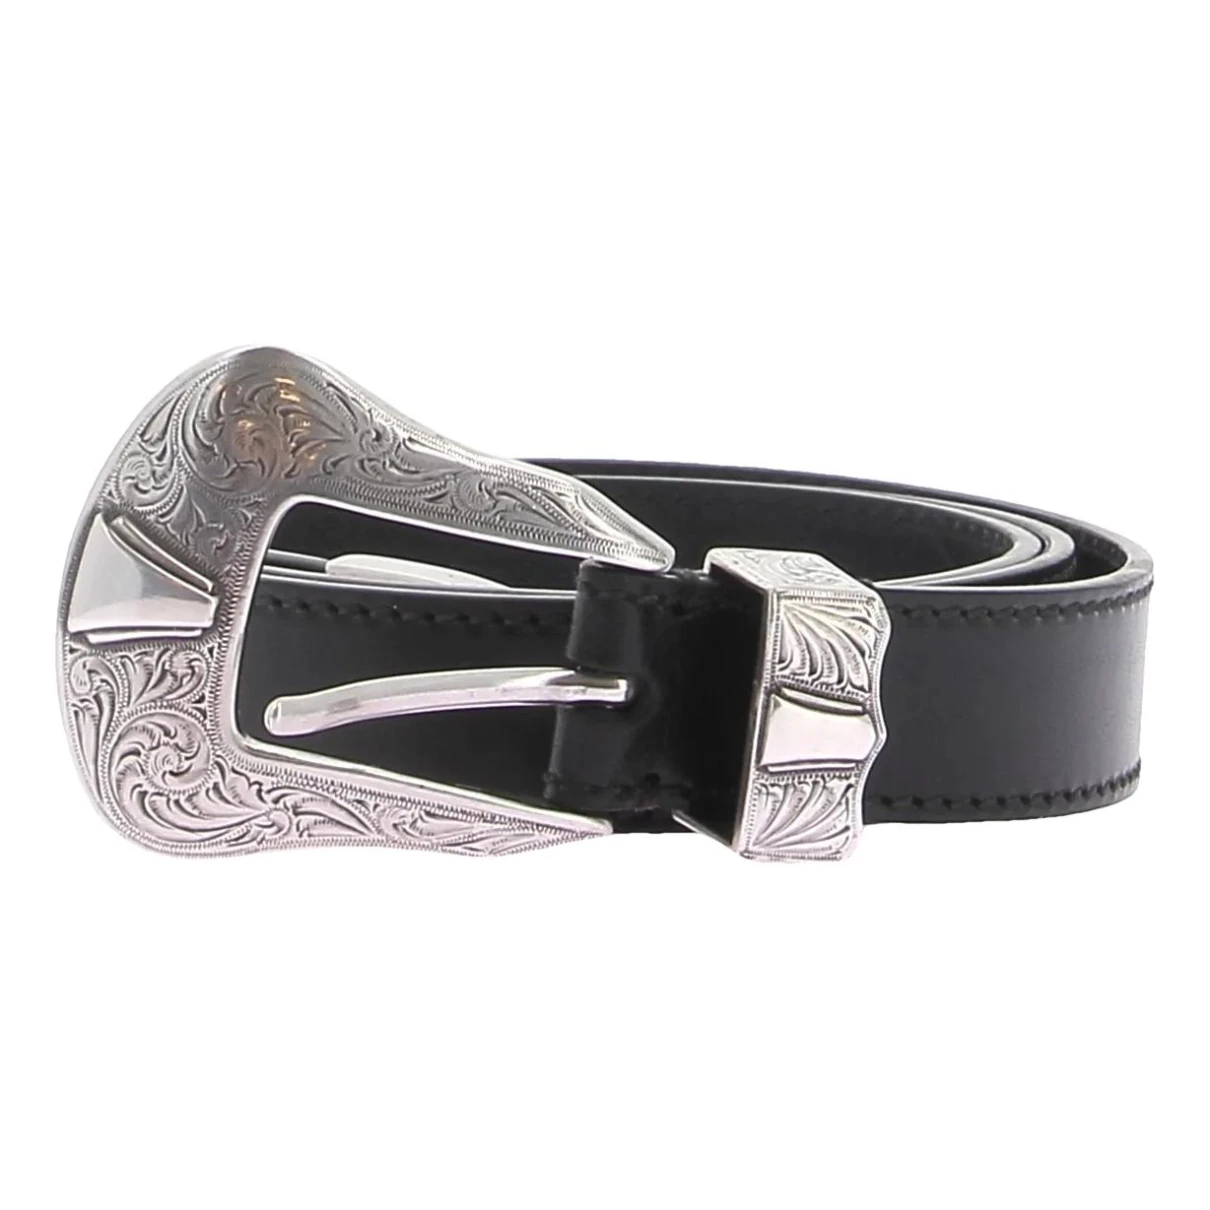 Pre-owned Kate Cate Leather Belt In Black